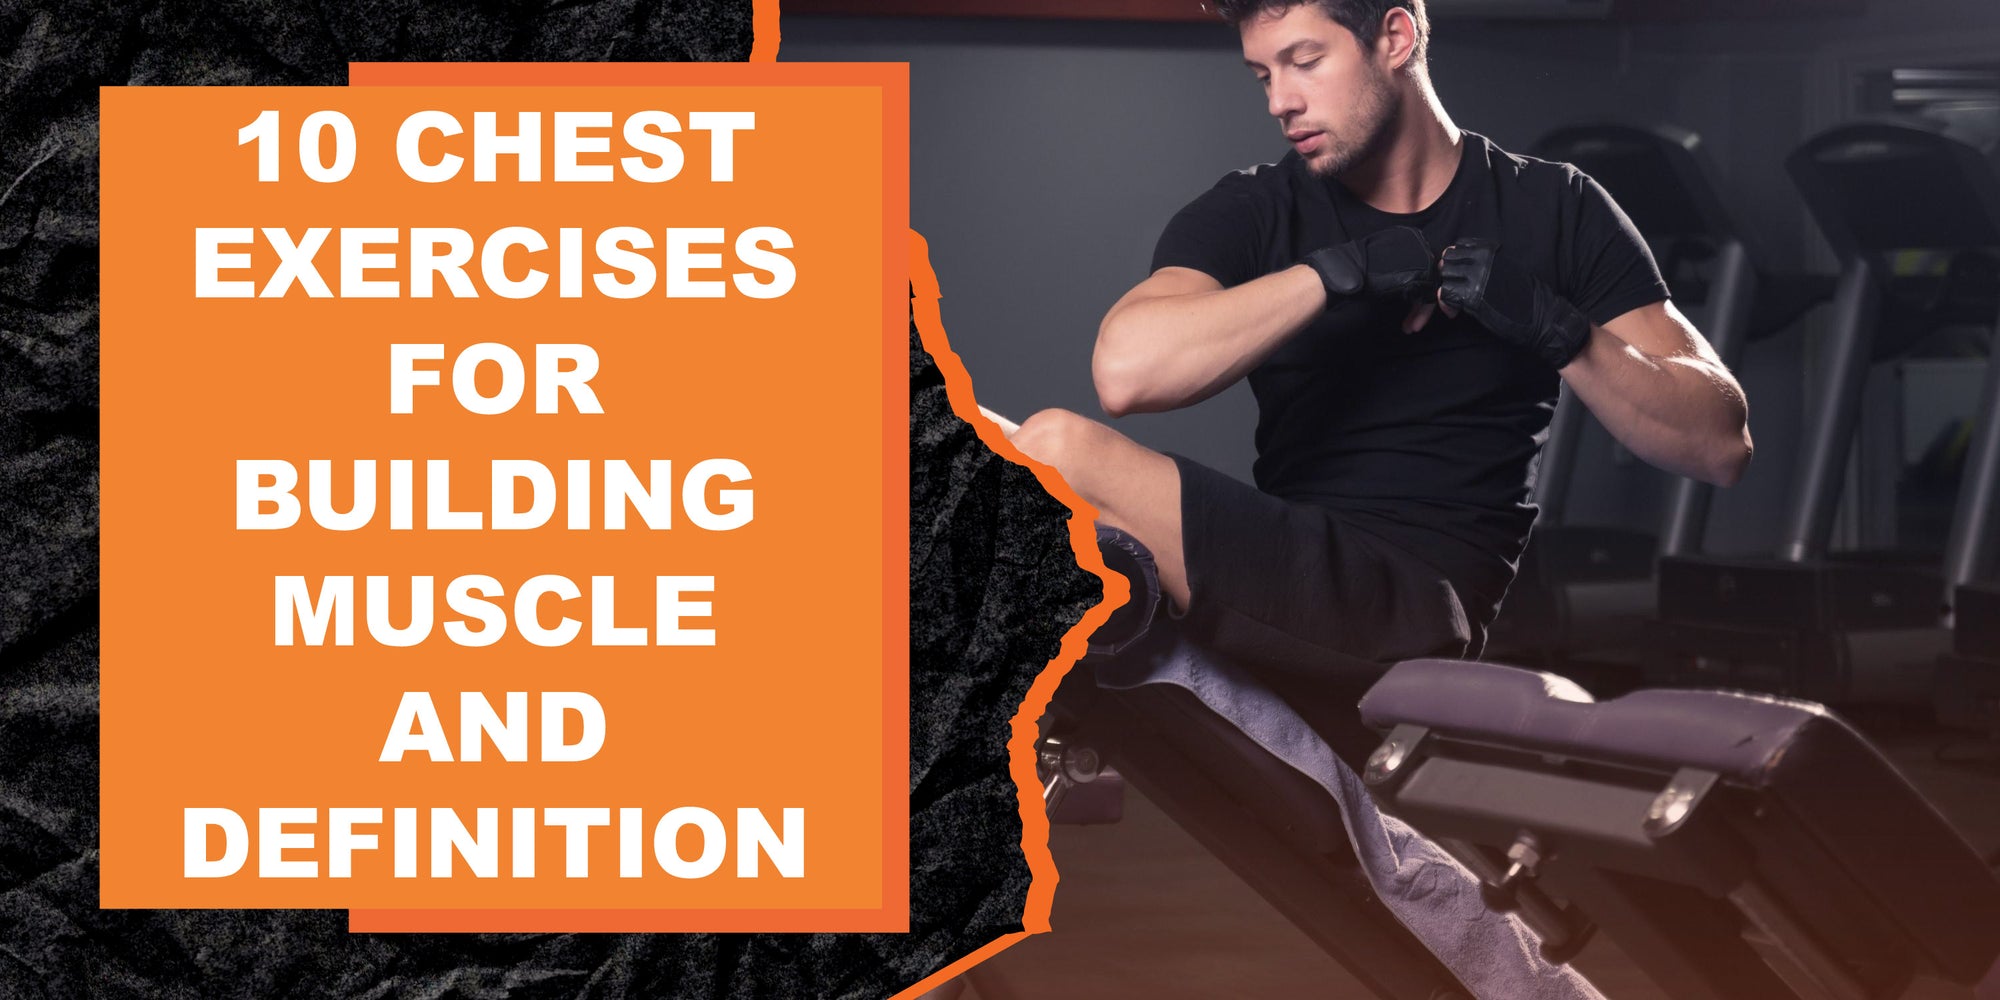 10 Chest Exercises for Building Muscle and Definition